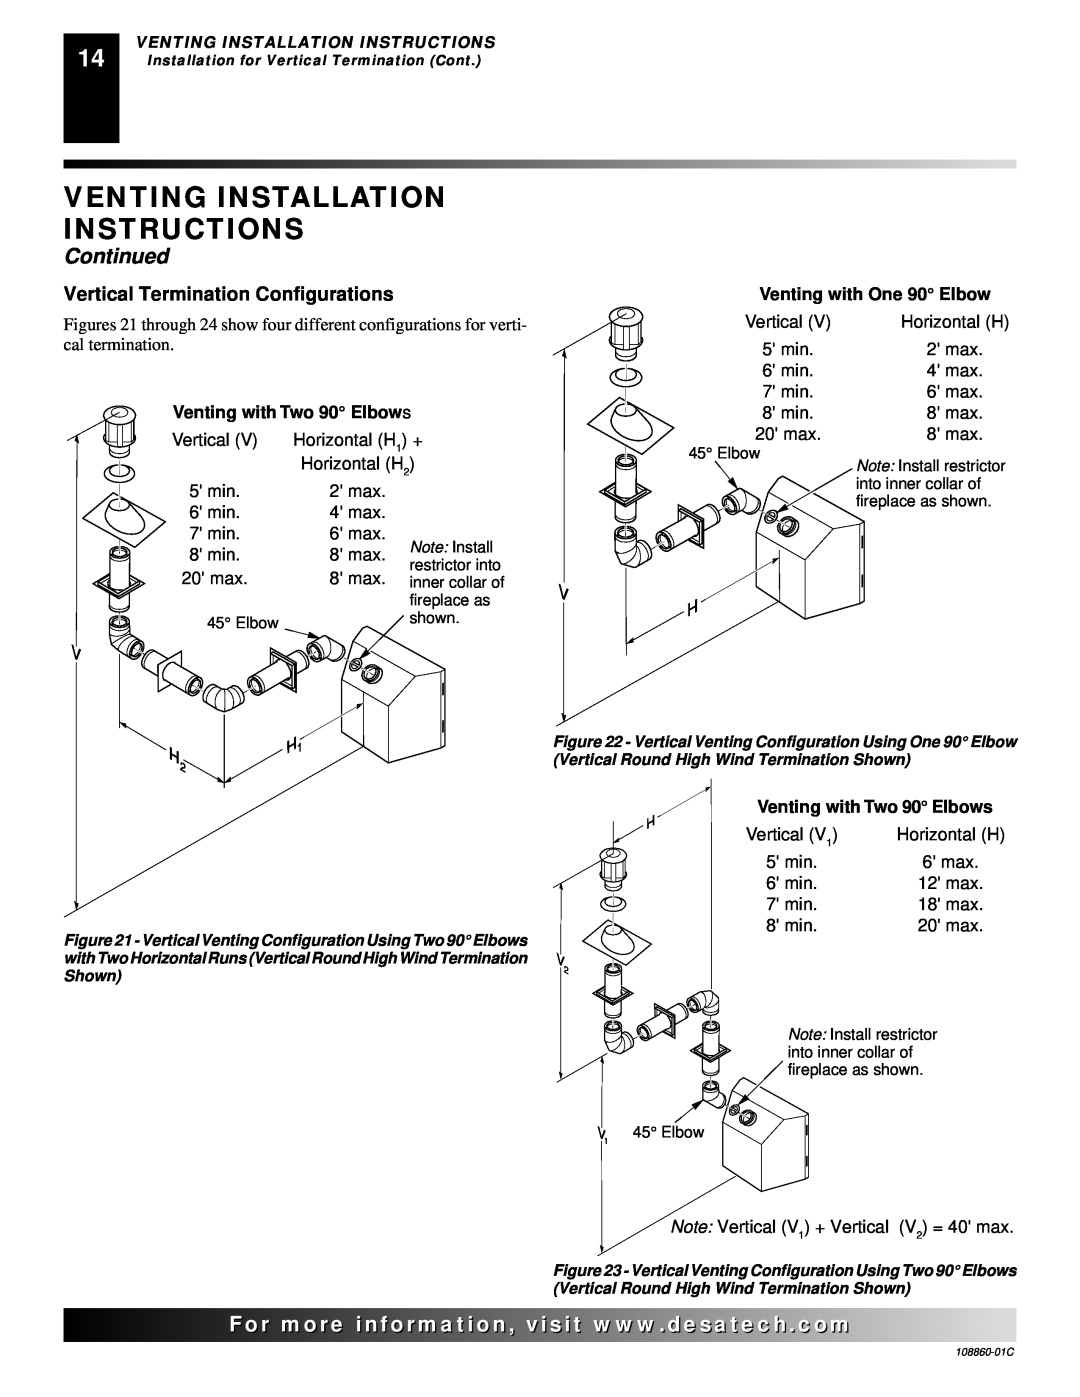 Desa (V)T36EP Venting Installation Instructions, Continued, Vertical Termination Configurations, Venting with One 90 Elbow 